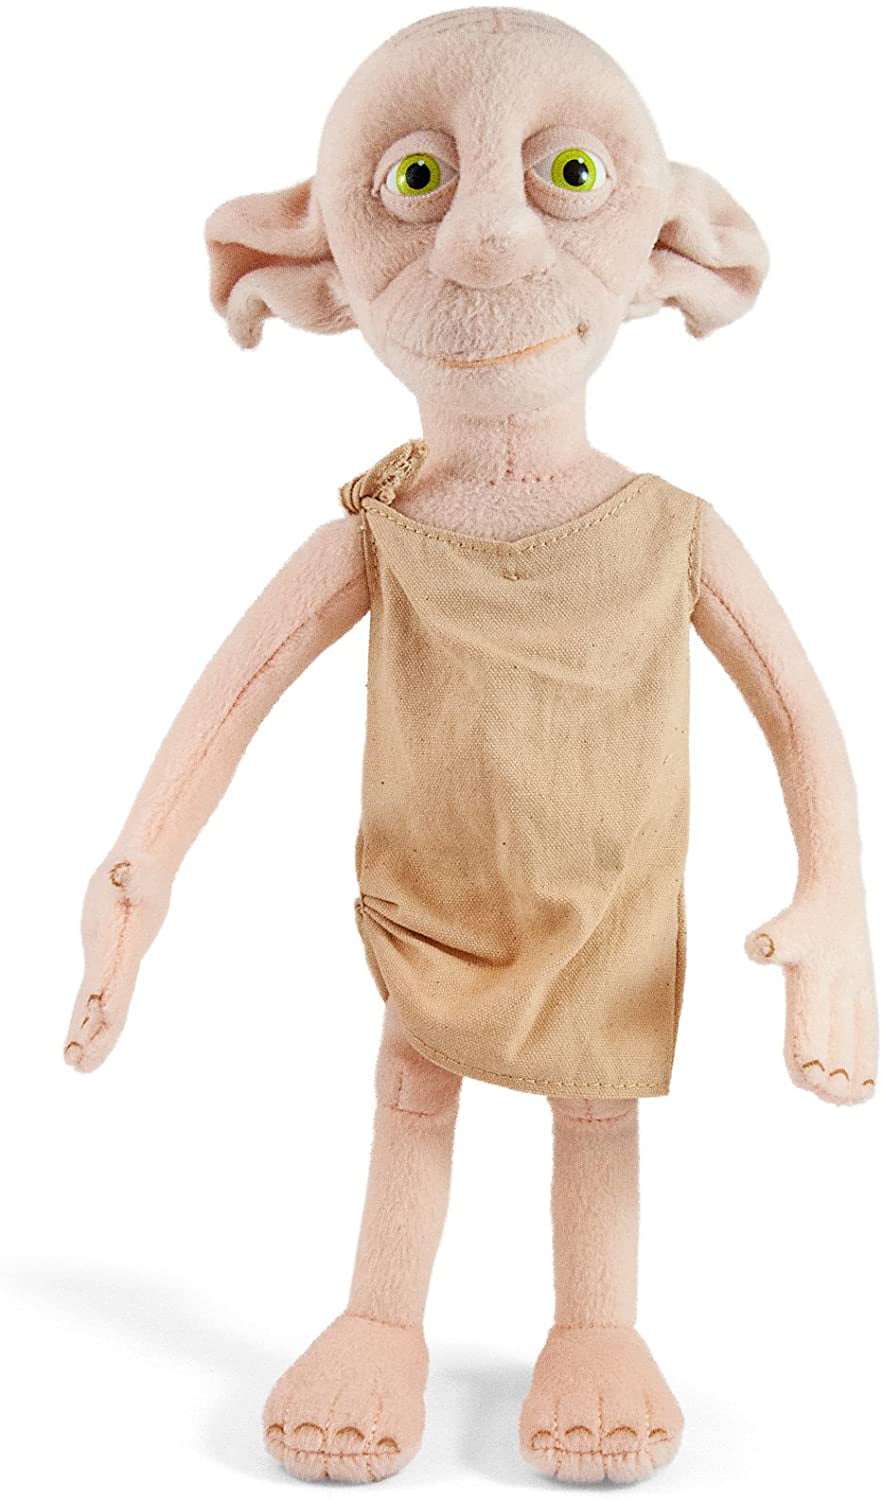 Harry Potter Dobby Plush Toy 8” The Noble Collection for sale online 